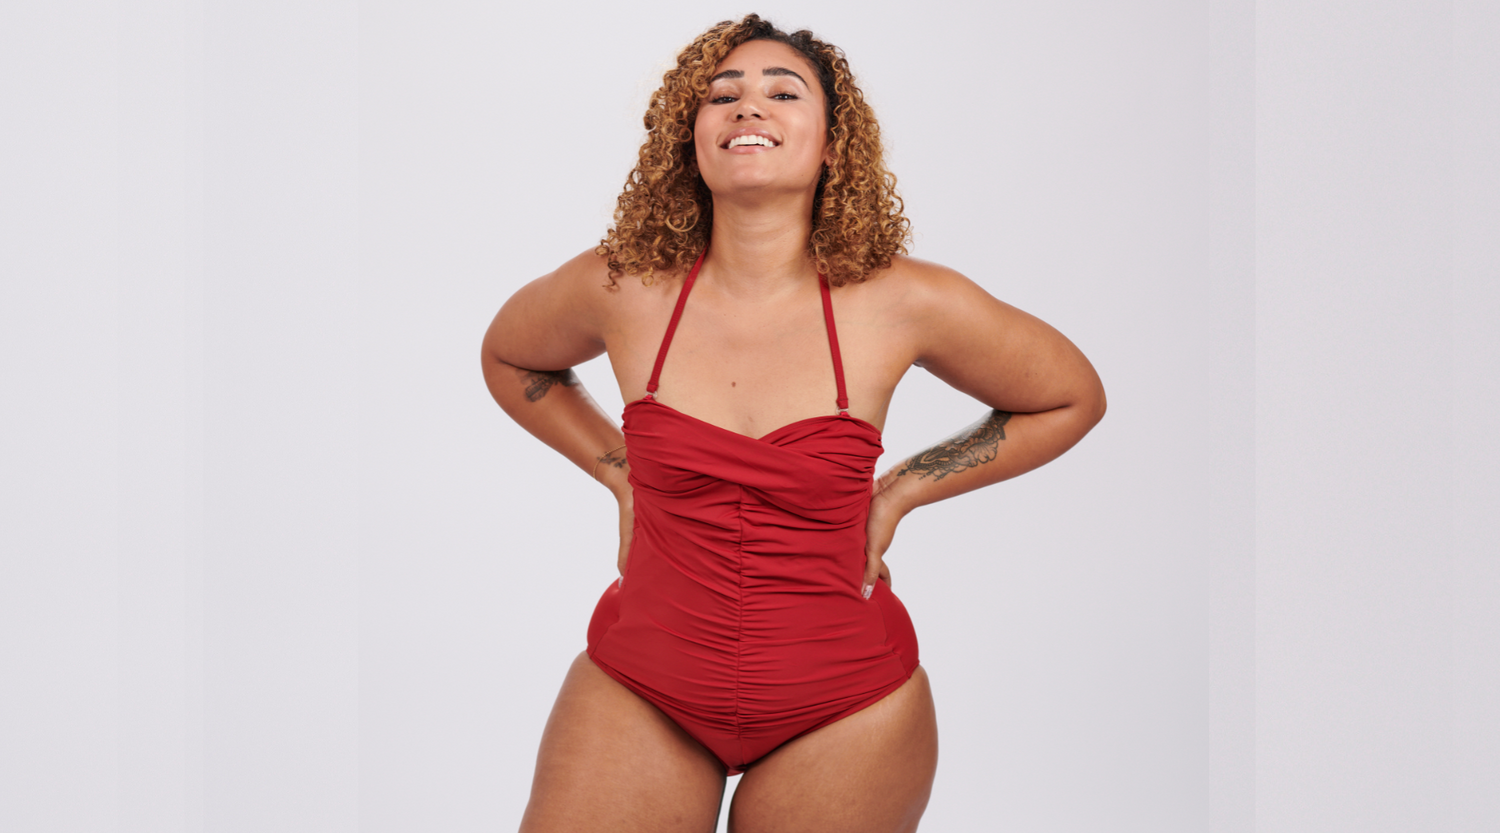 Read about Swimming with Confidence: A Straight Forward Guide for Stoma Patients - by Annarita Baris - at whiteroseostomy.co.uk